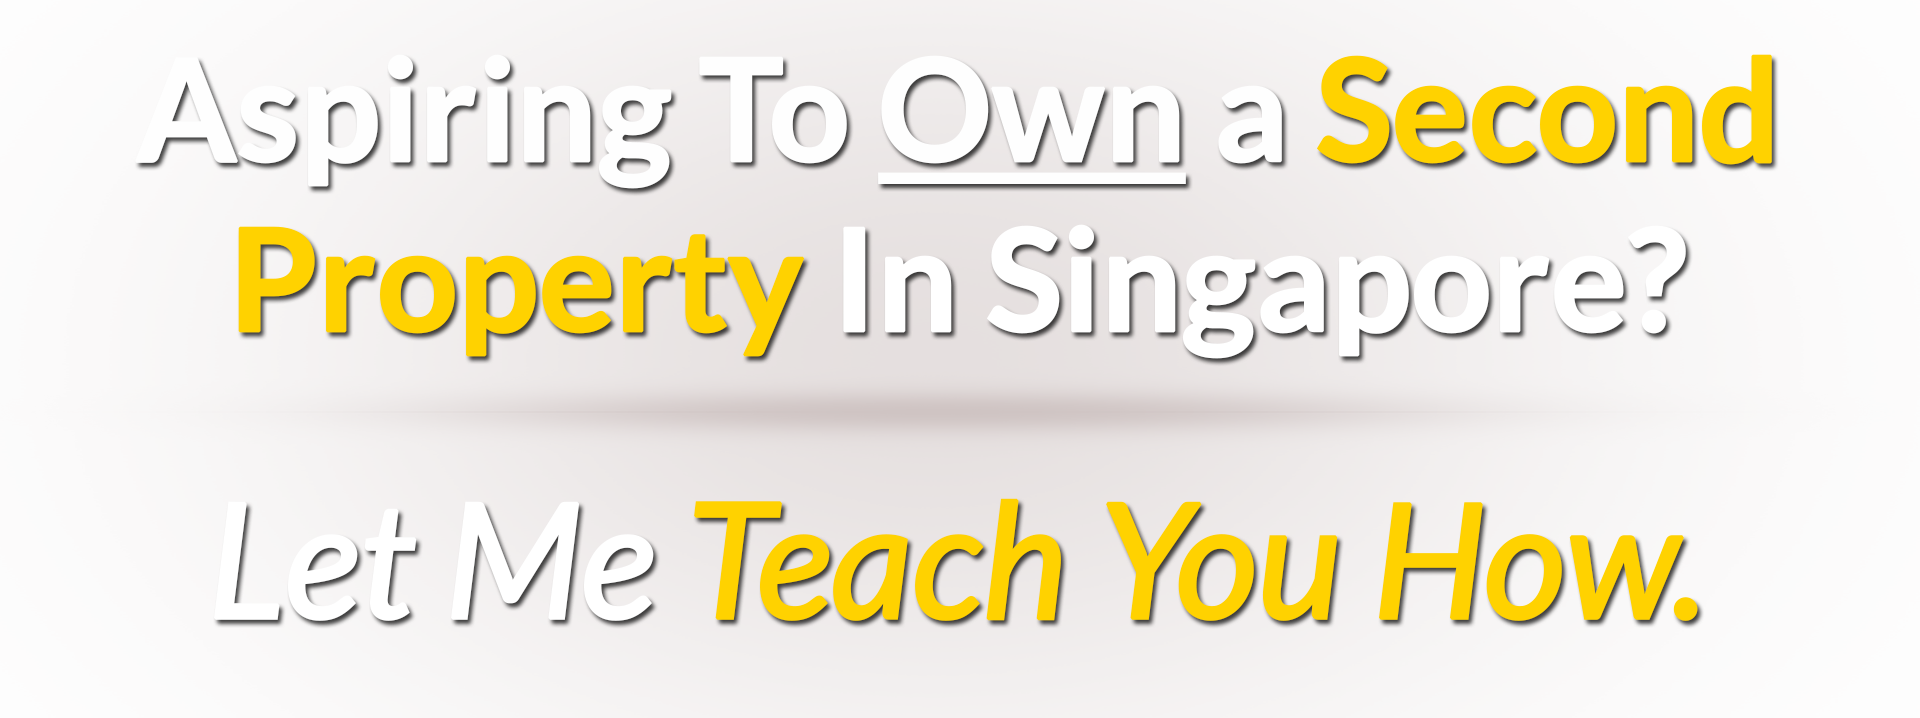 Second Property Investors | Buy A Second Property In Singapore